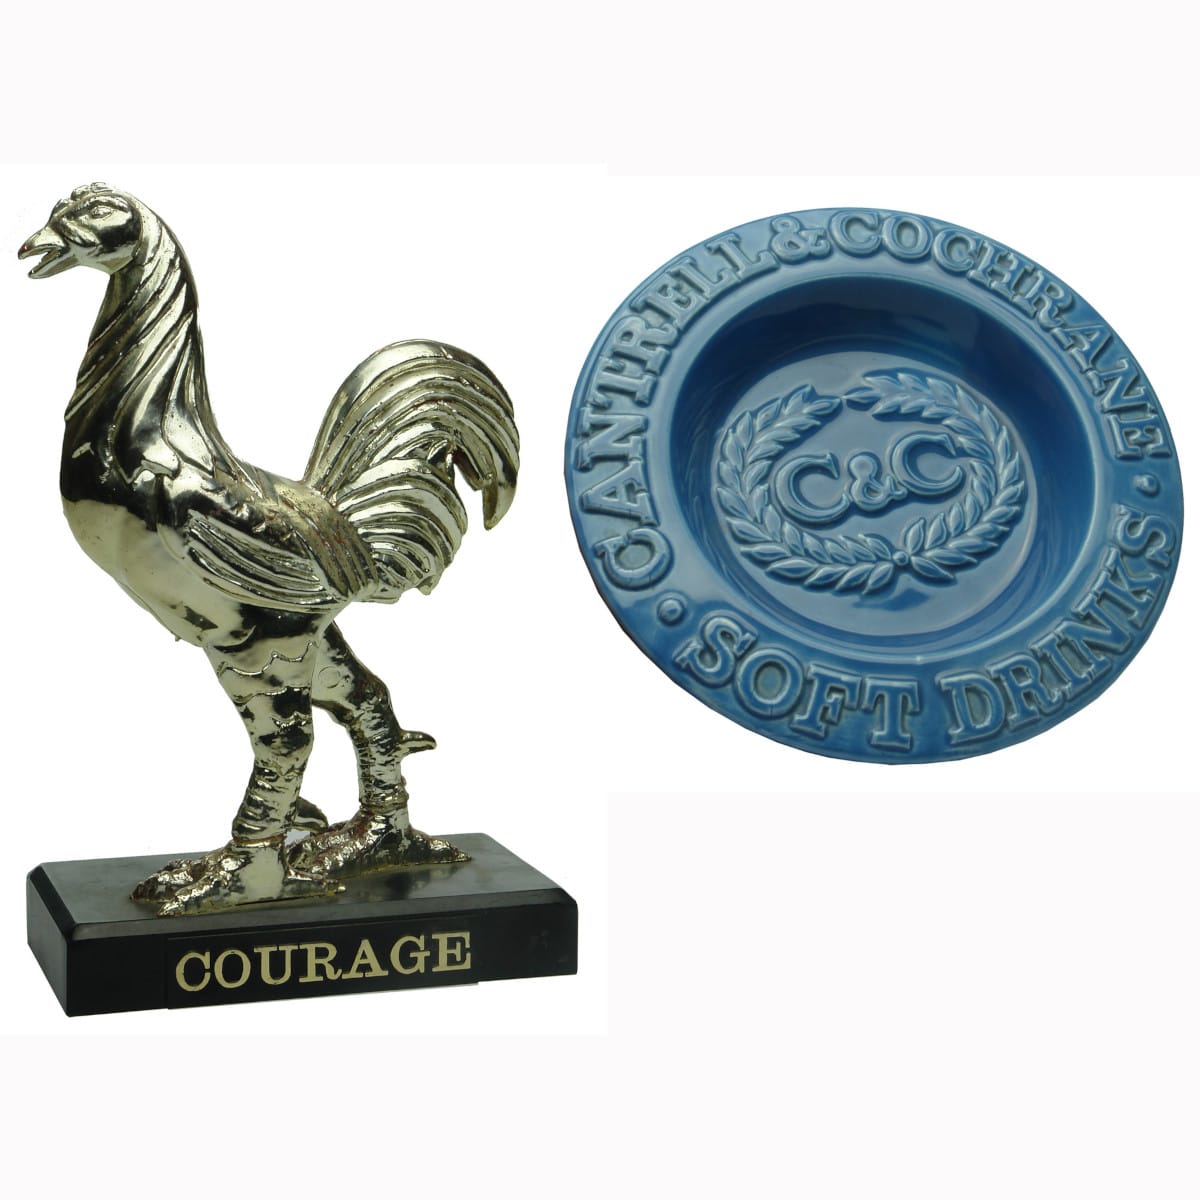 Pair of Advertising Pieces: Courage statuette & Cantrell & Cochrane Change tray.